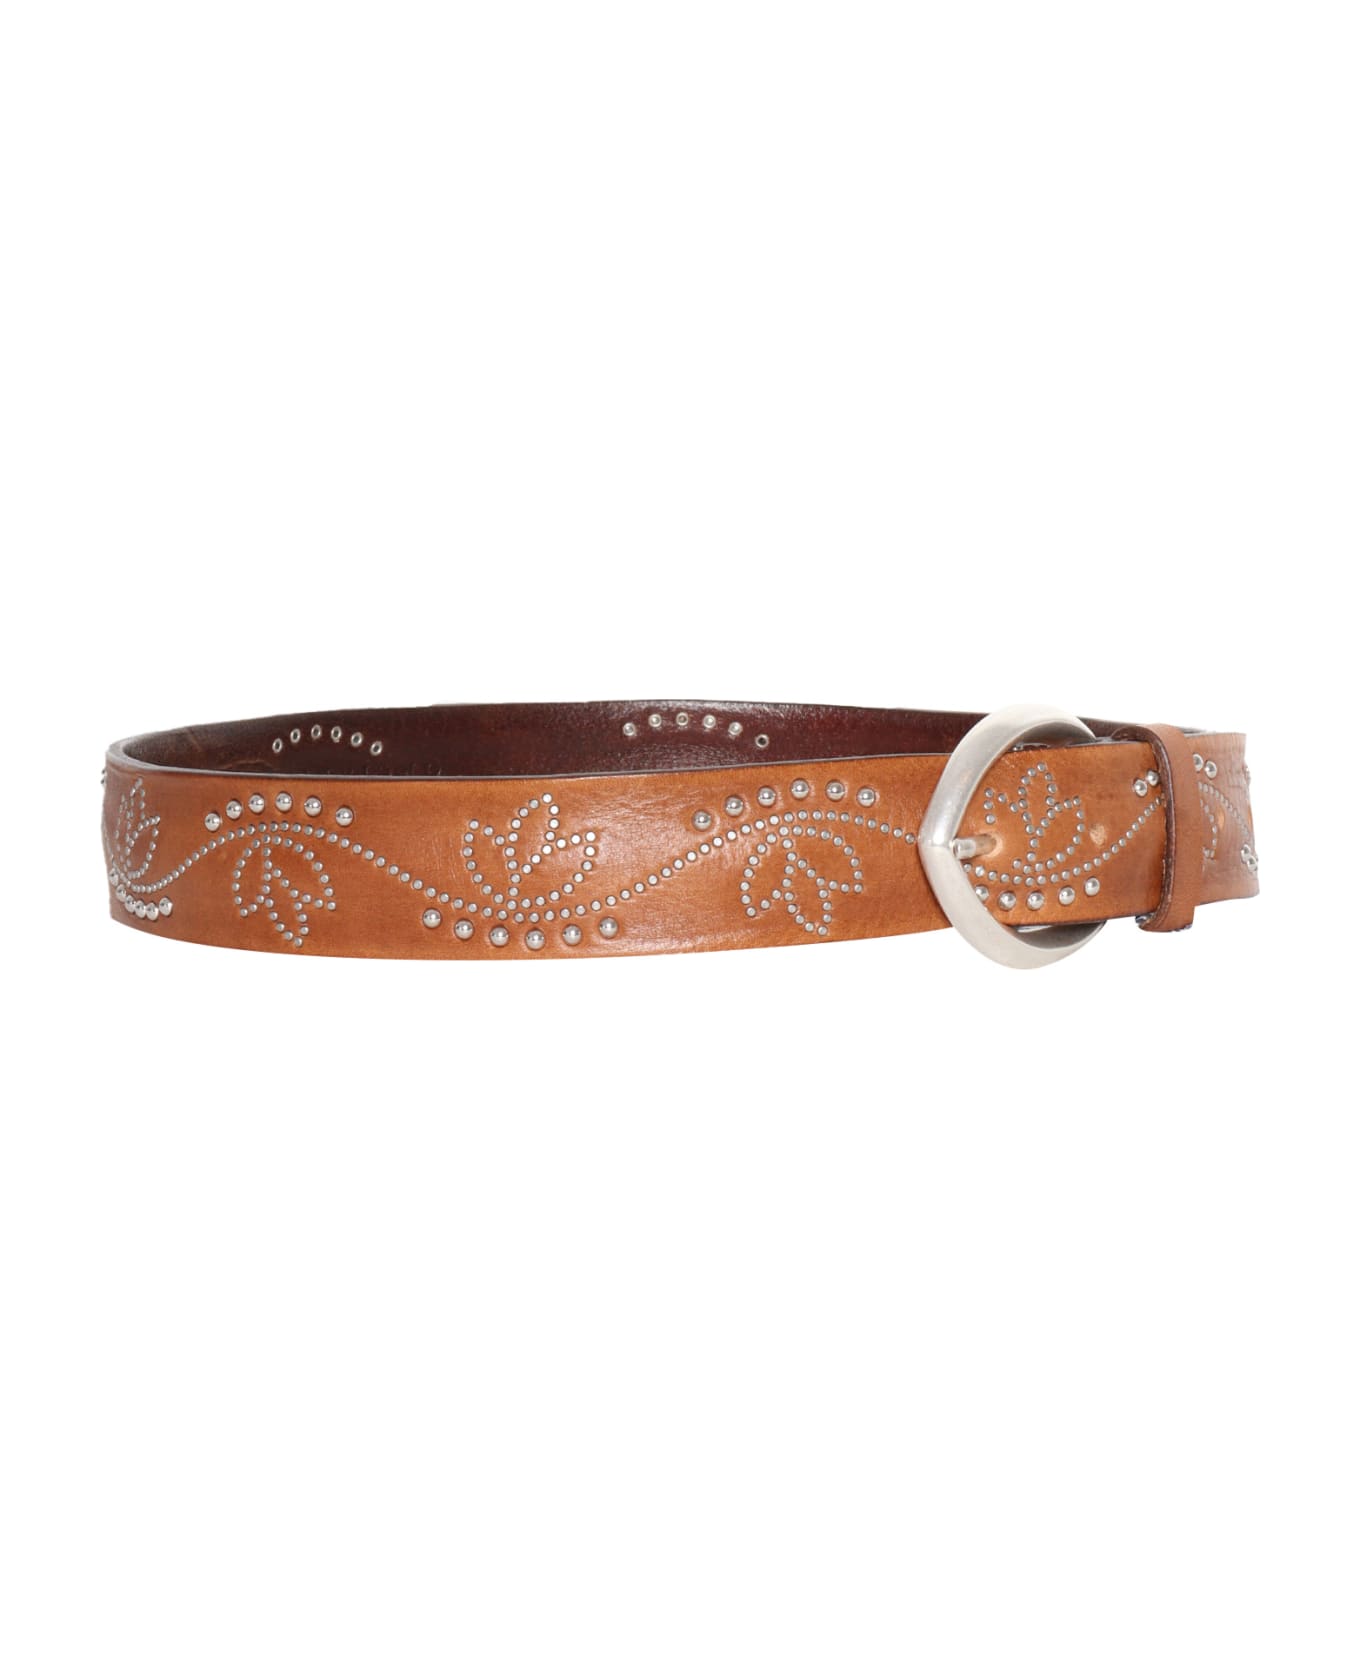 Orciani Leather Belt With Studs - BROWN ベルト